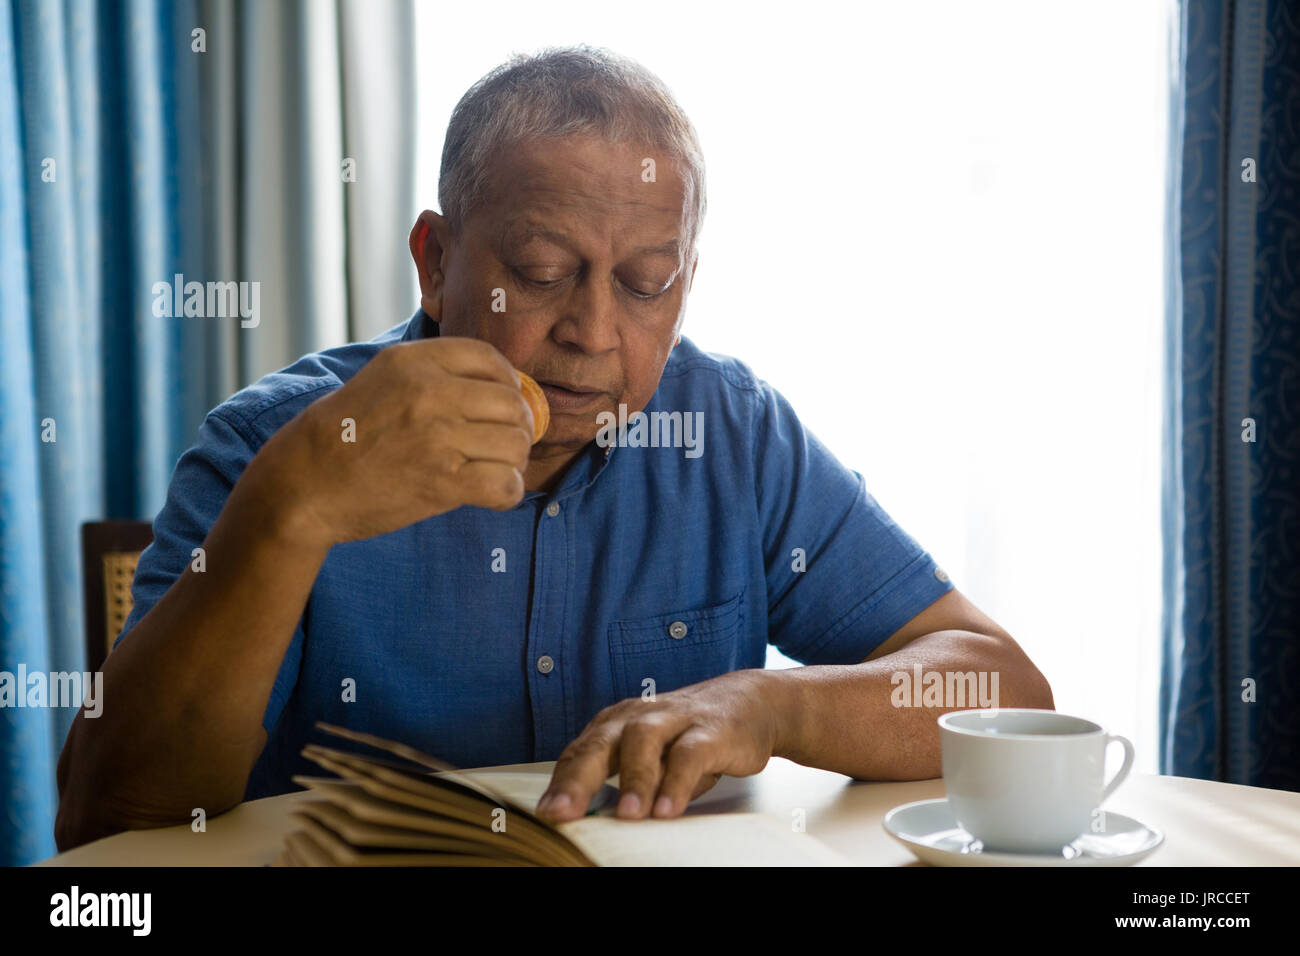 Senior man eating food while reading book at table in nursing home Stock Photo